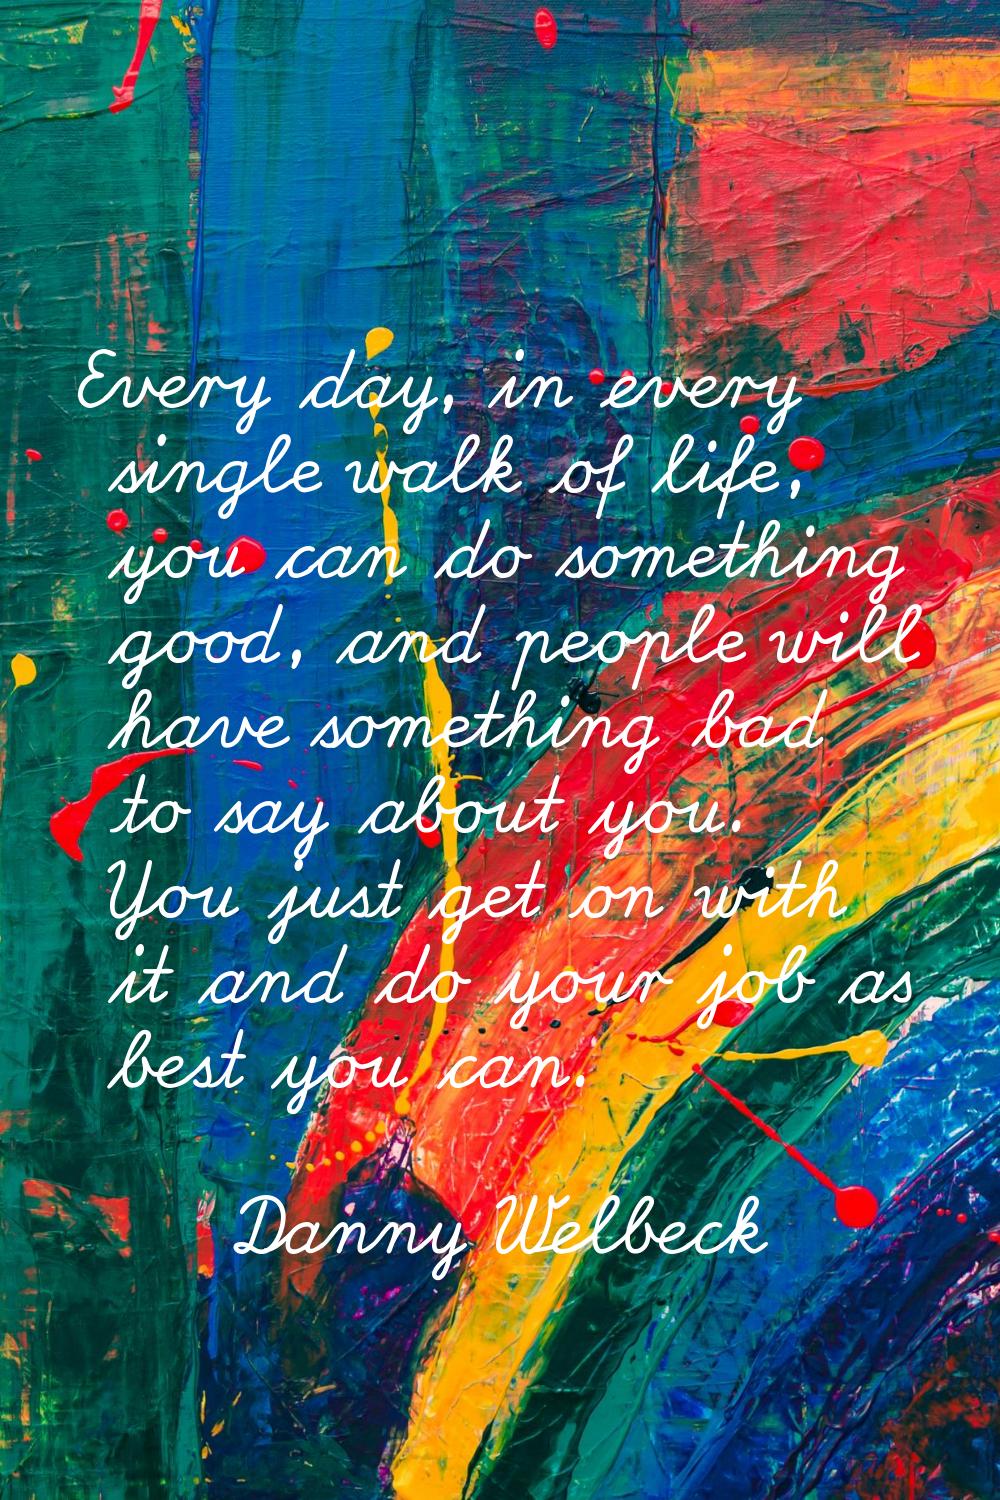 Every day, in every single walk of life, you can do something good, and people will have something 